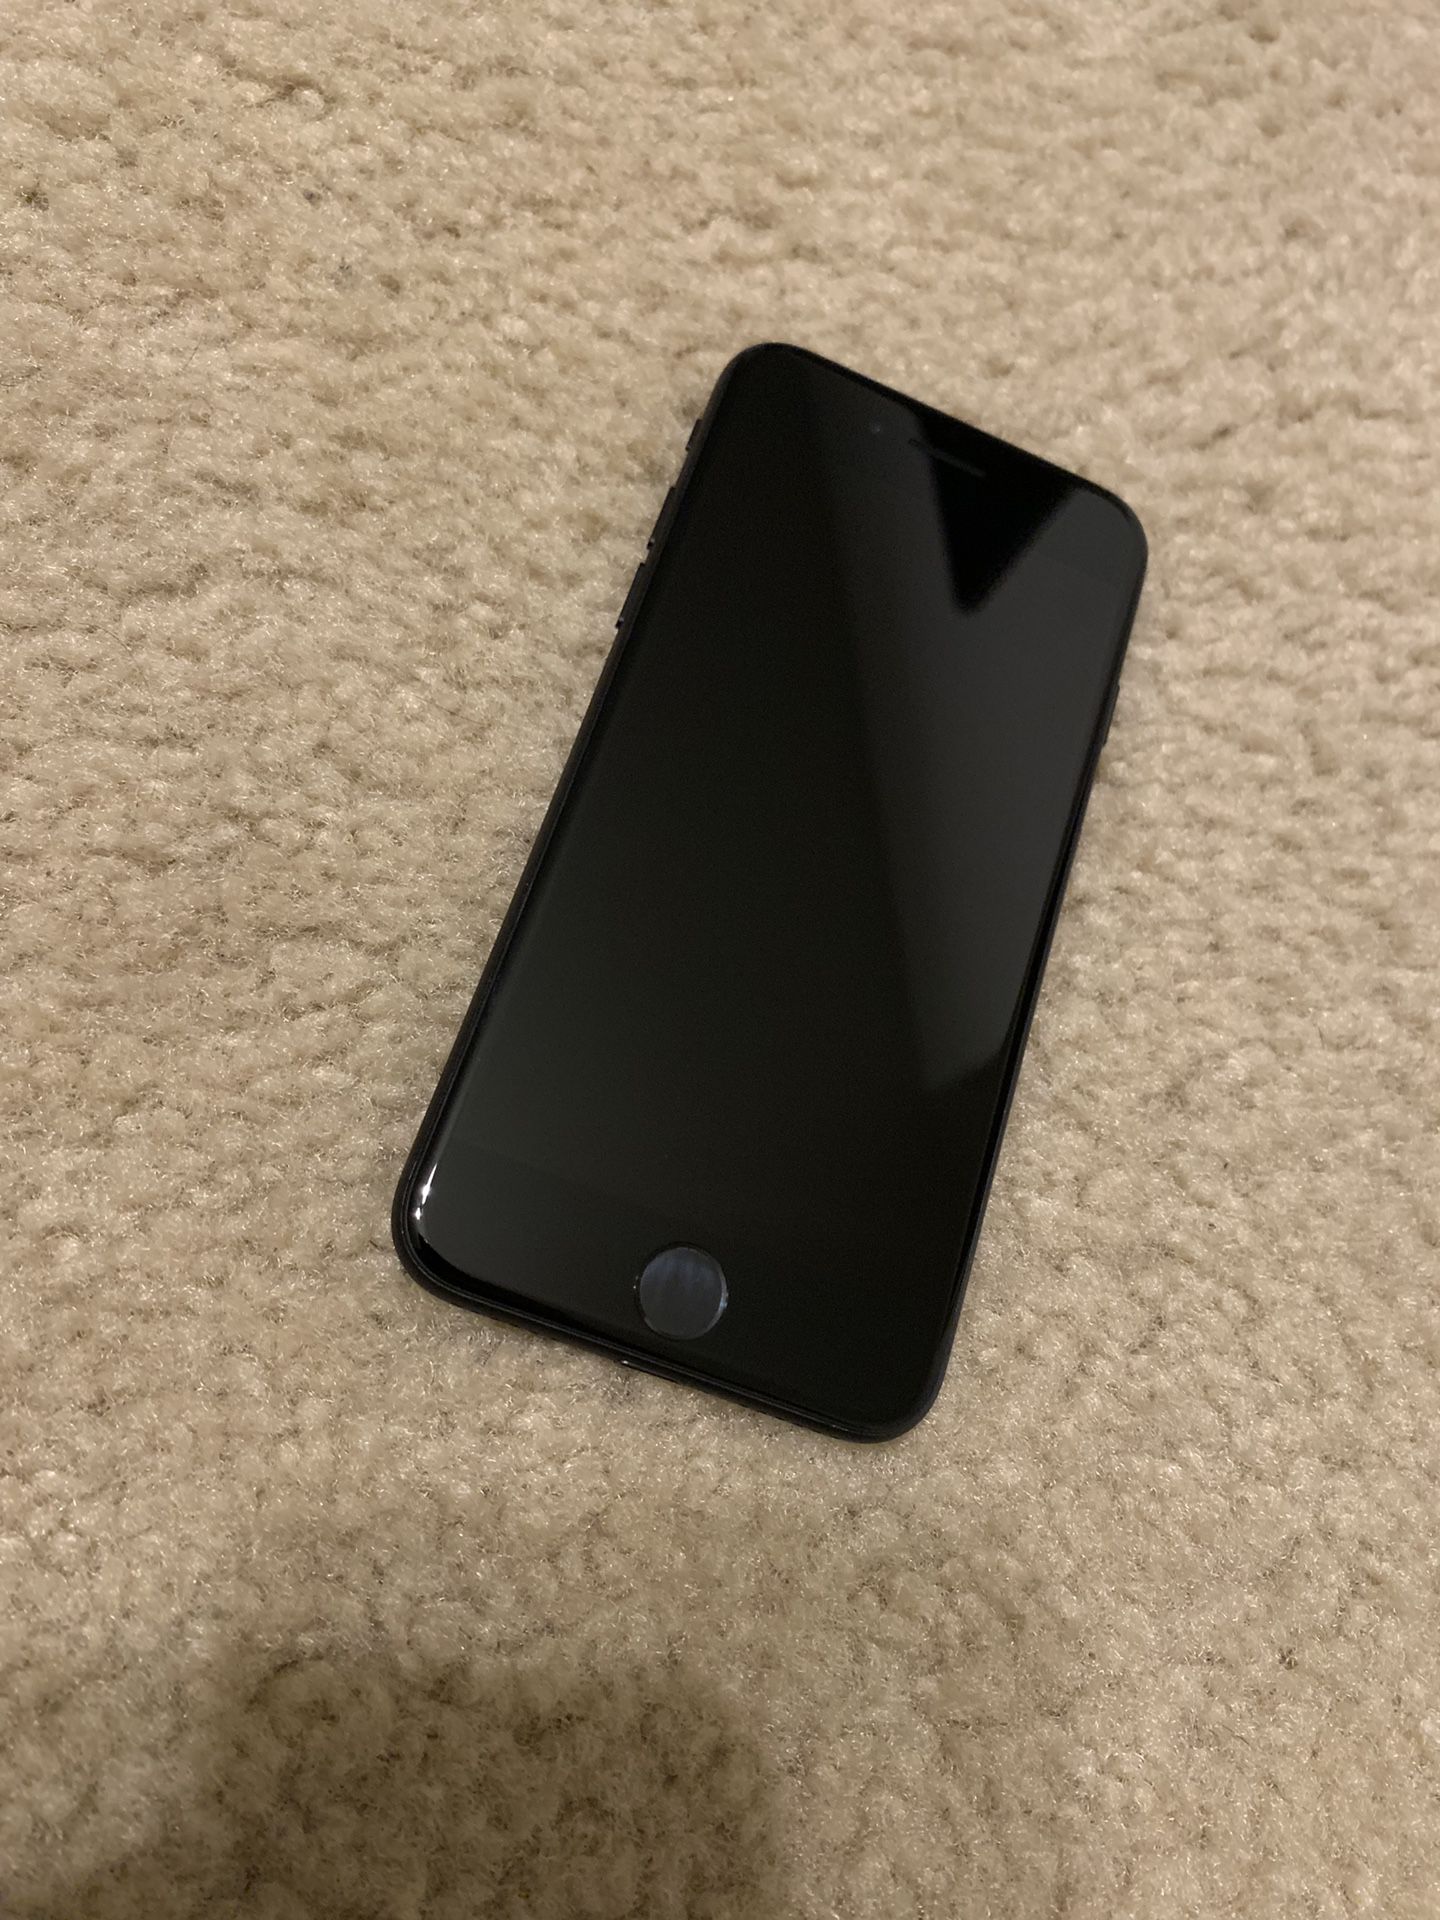 Apple iPhone 7 128GB Black UNLOCKED for ANY Carrier